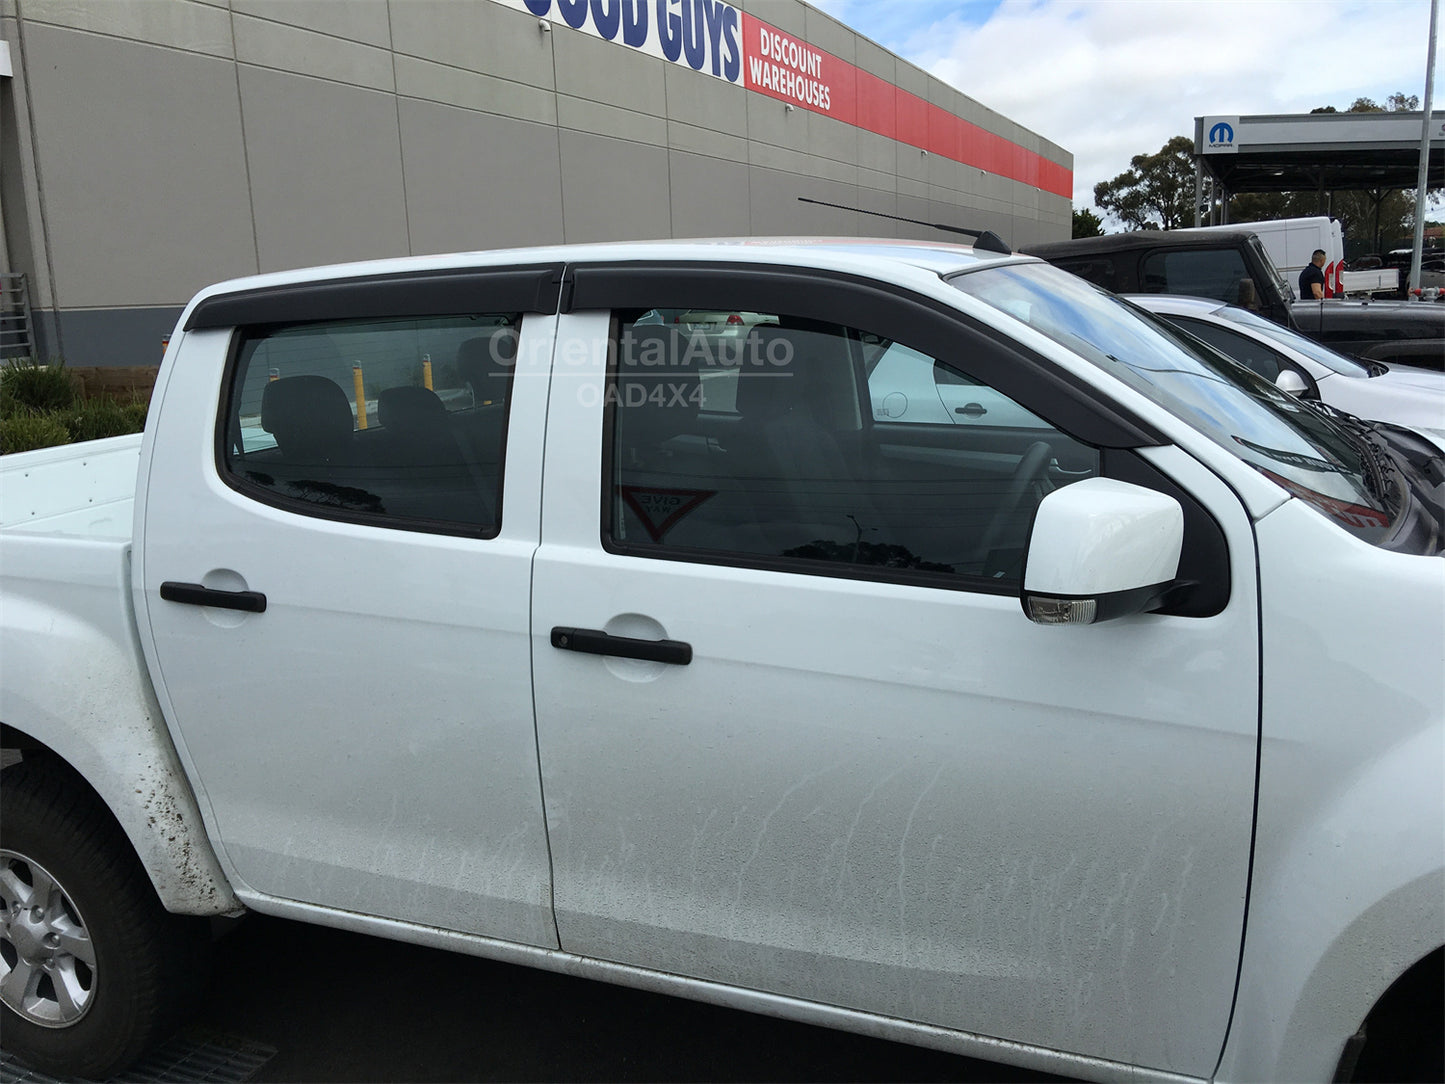 Bonnet Protector & Injection Weathershields Weather Shields Window Visors for Holden Colorado  RG Series Dual Cab 2016-Onwards